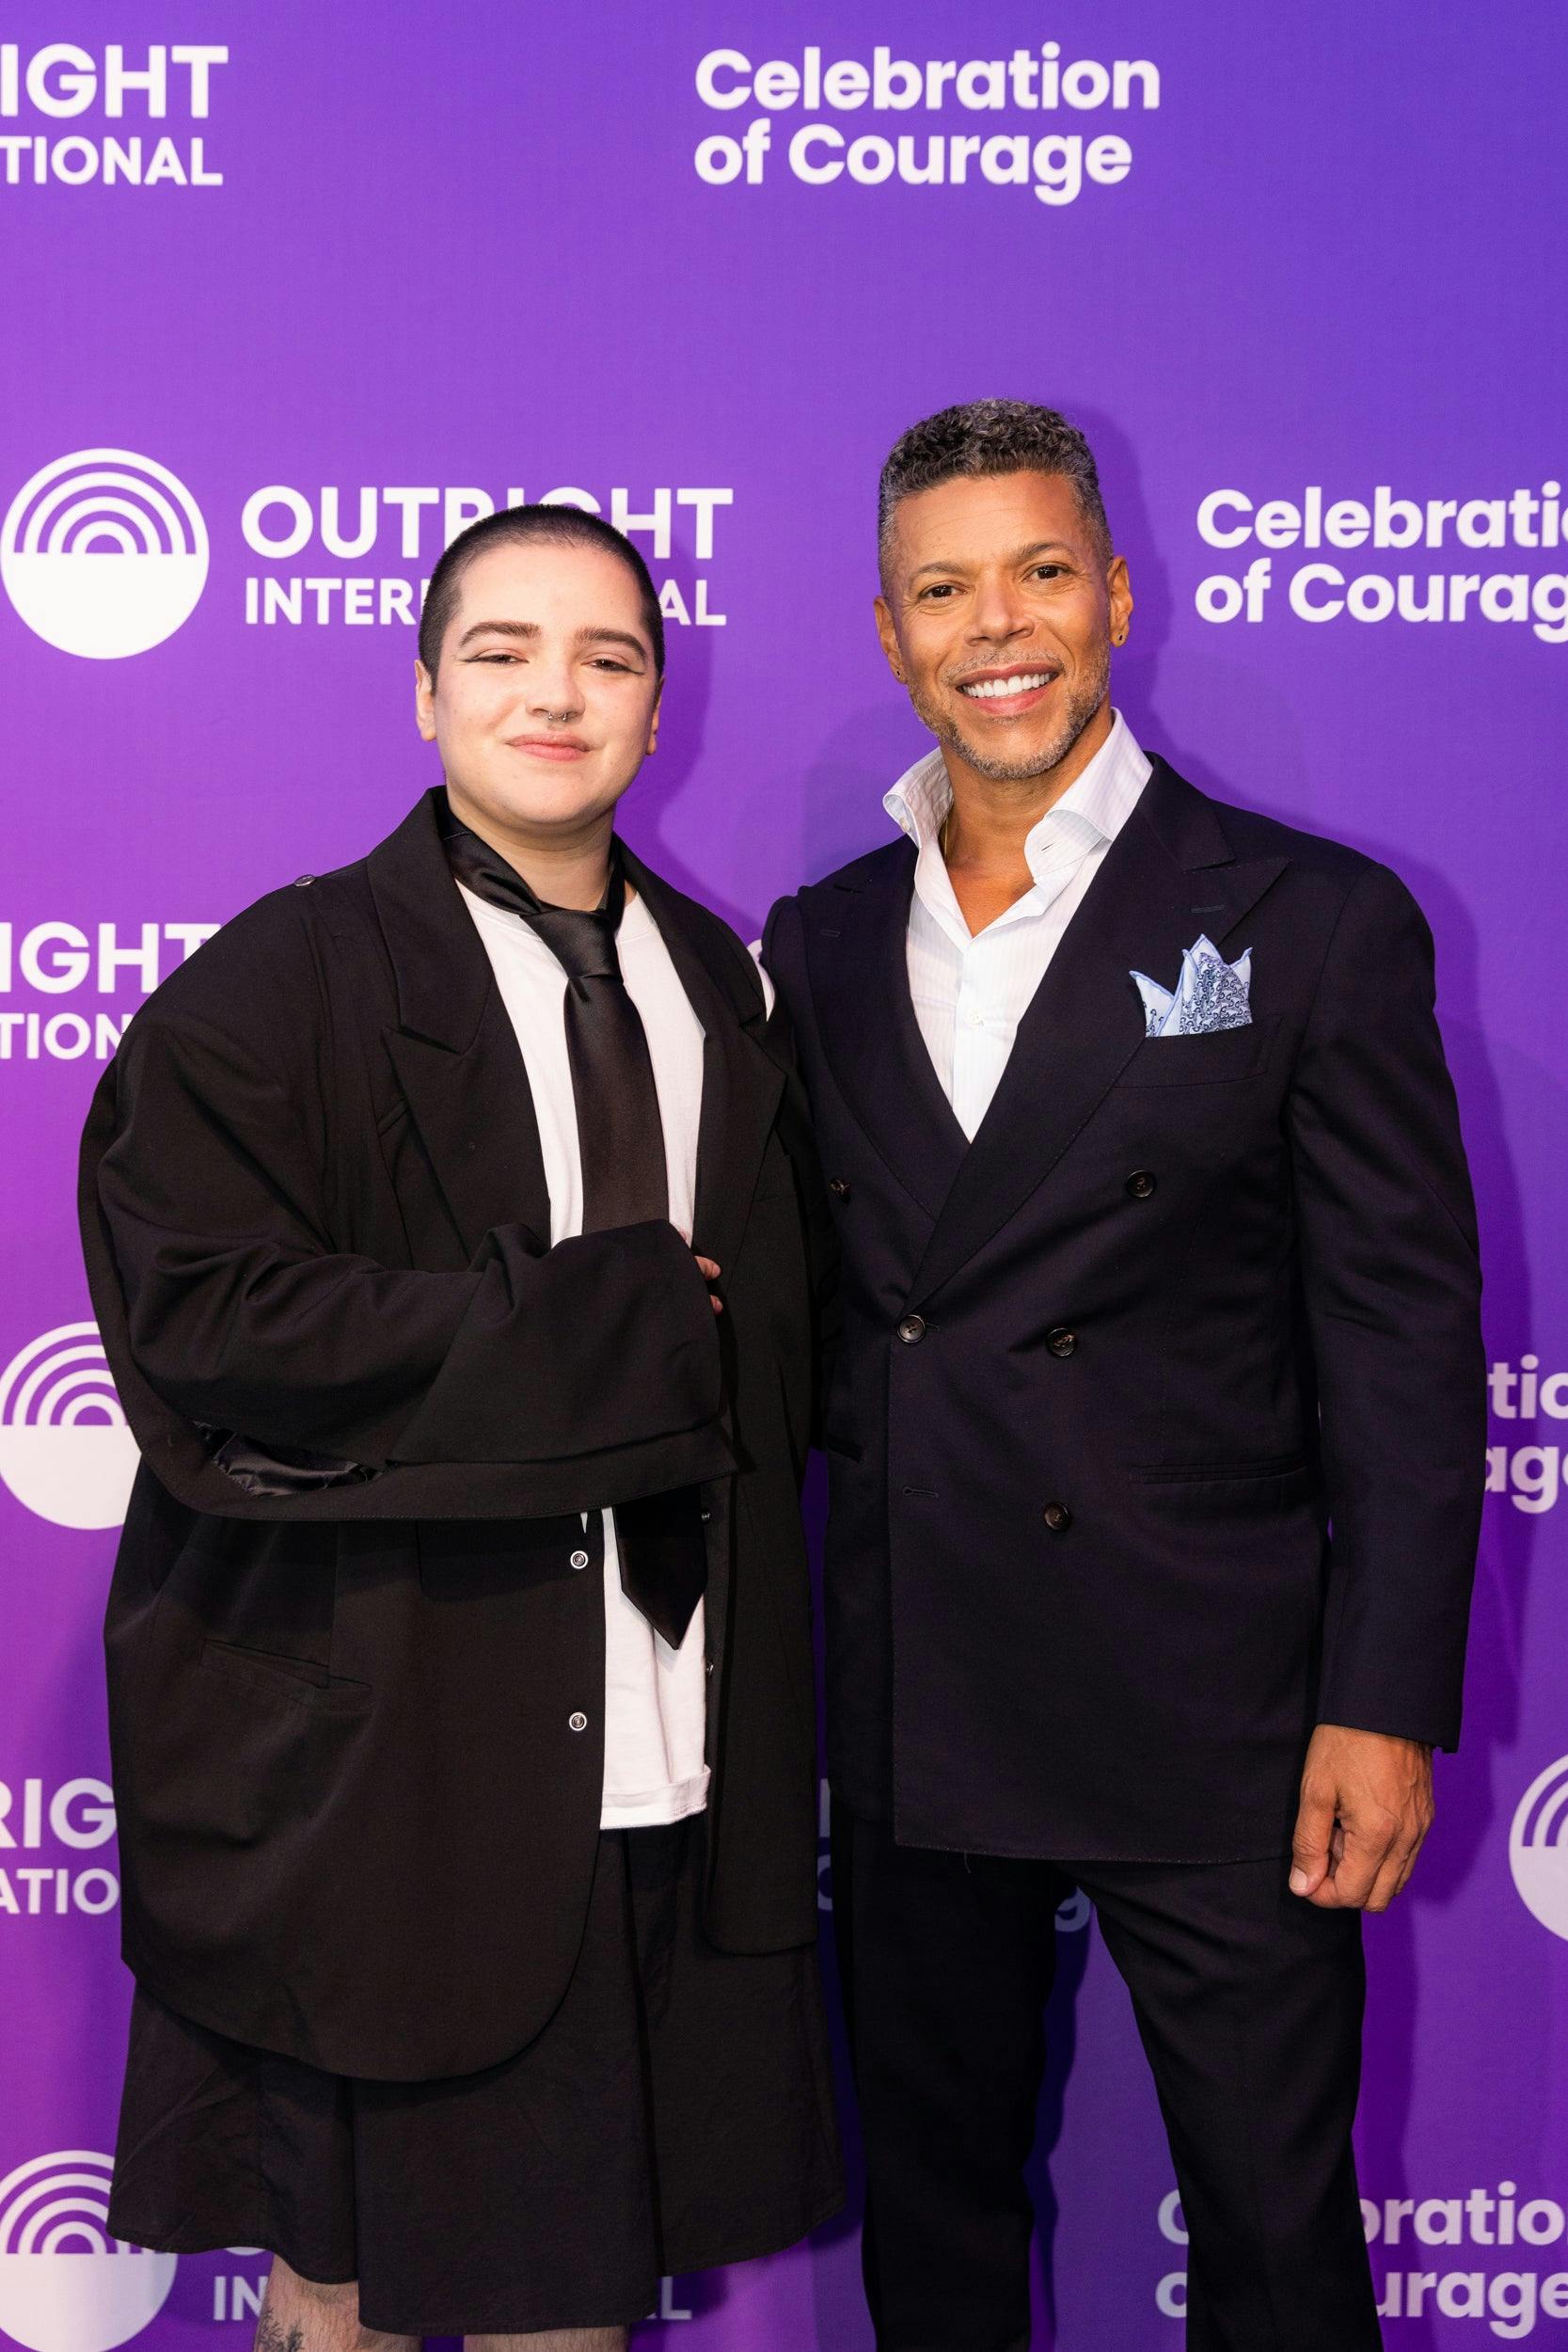 Star Trek: Discovery's Wilson Cruz and Blu del Barrio on the red carpet for 27th Celebration of Courage Awards and Gala